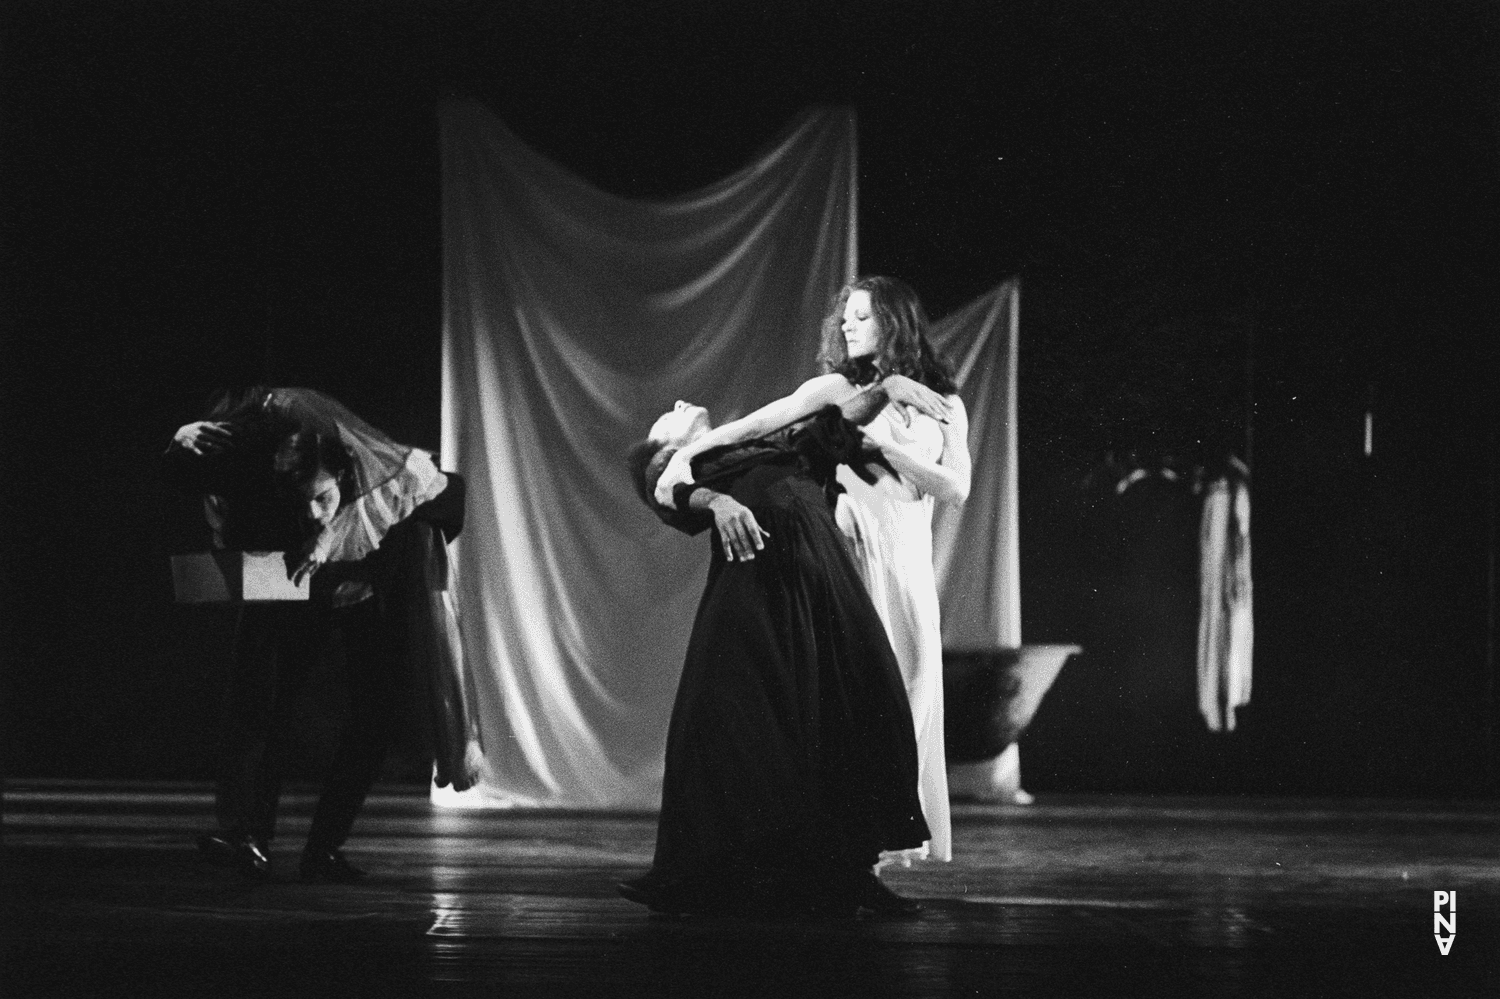 Carlos Orta and Malou Airaudo in “Iphigenie auf Tauris” by Pina Bausch at Opernhaus Wuppertal, April 20, 1974